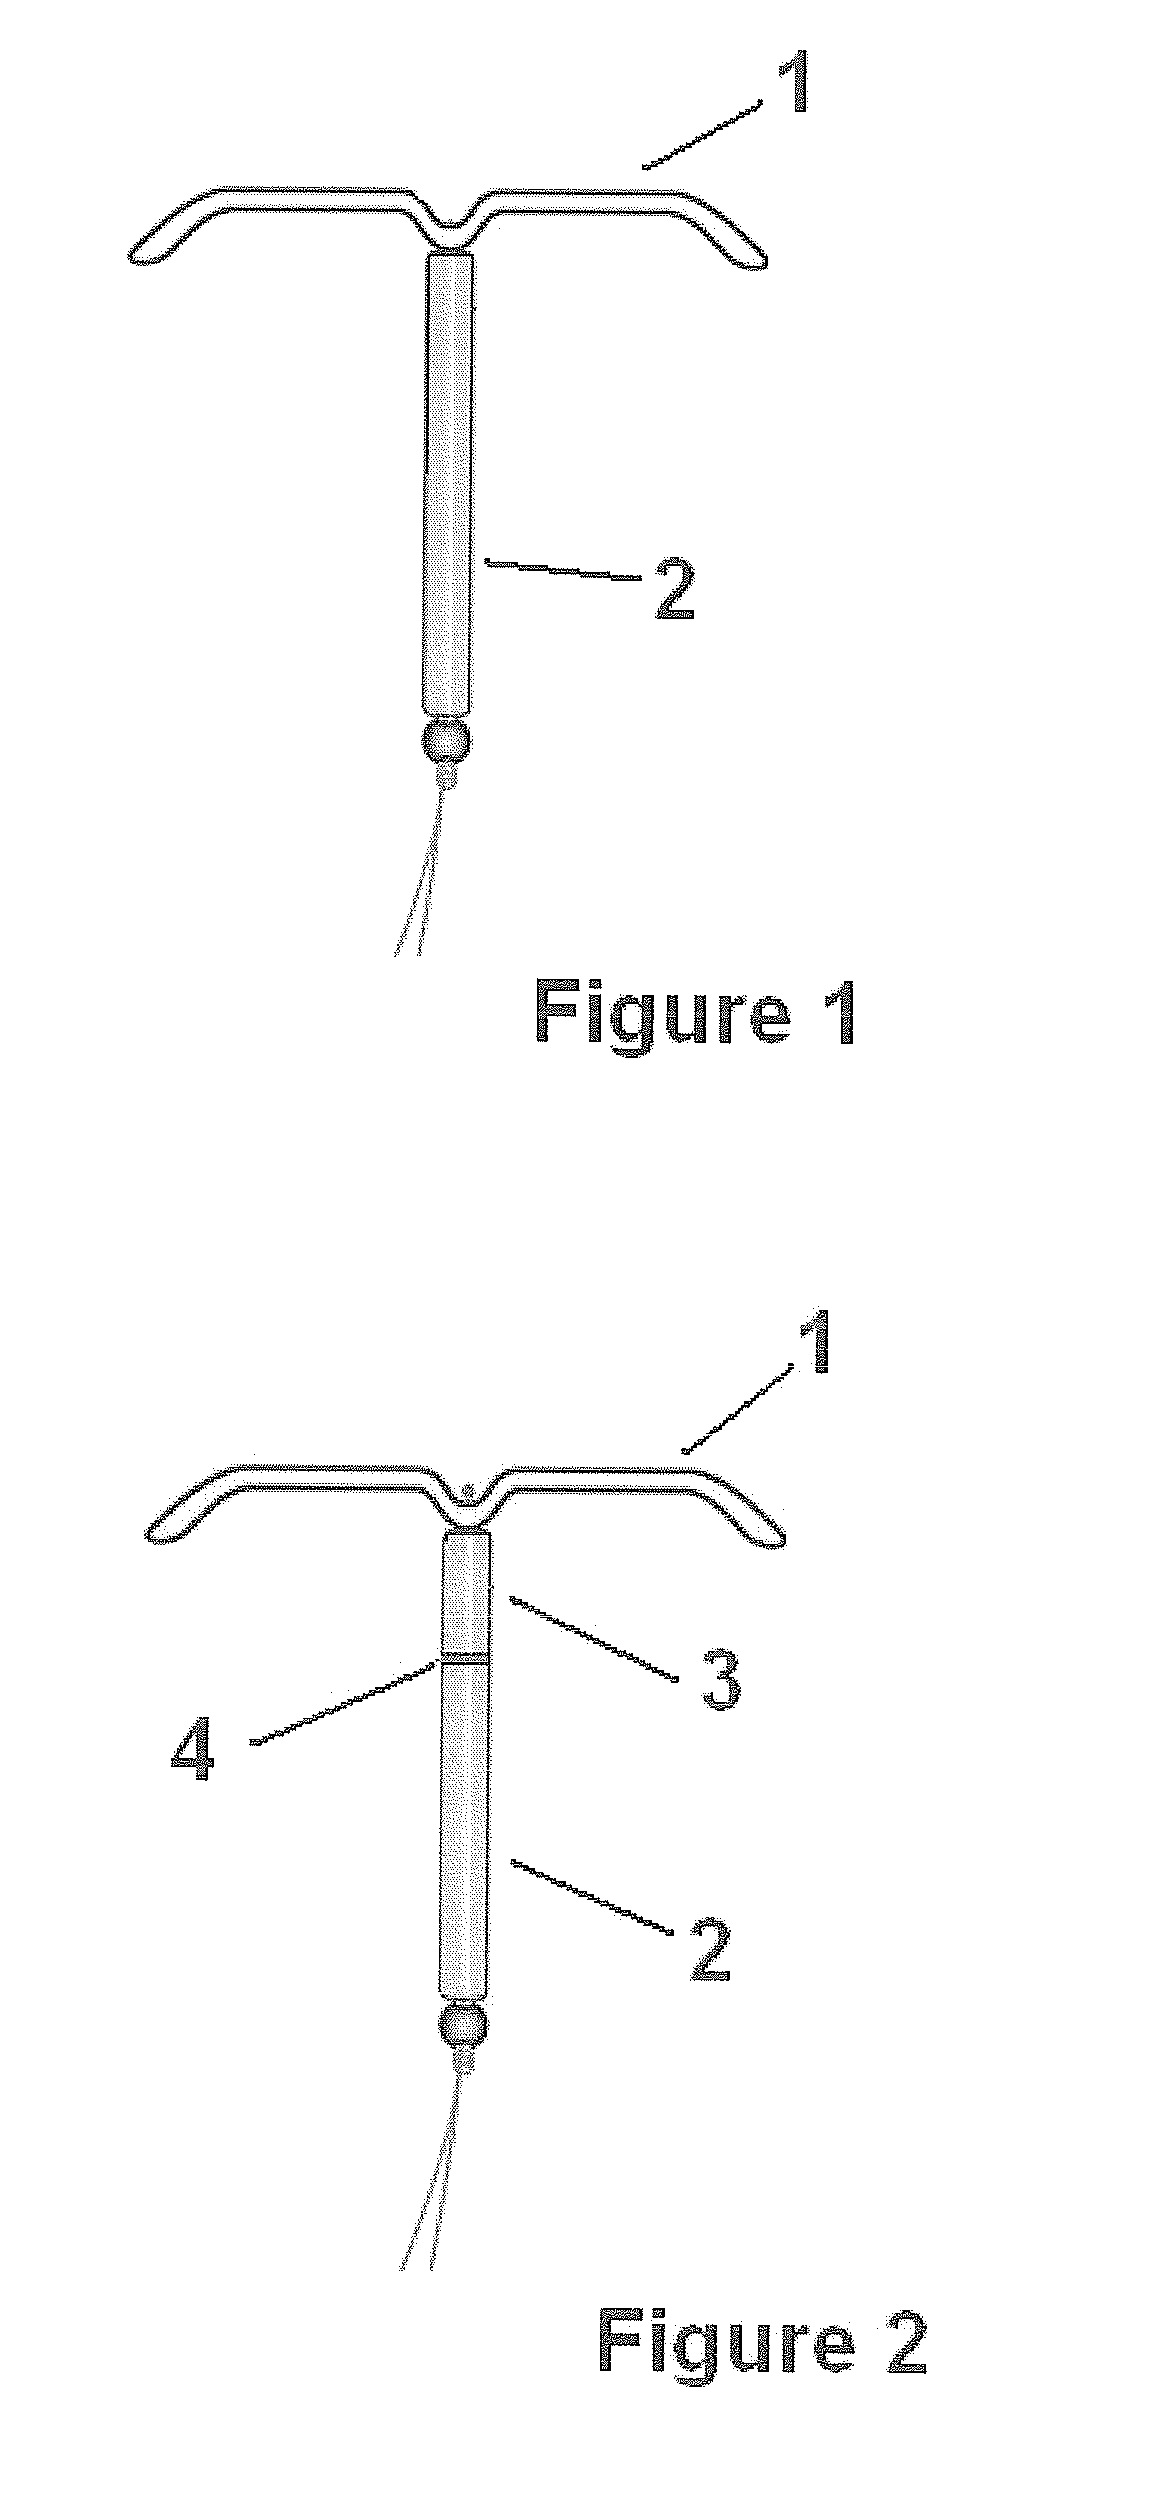 Intrauterine delivery system for contraception